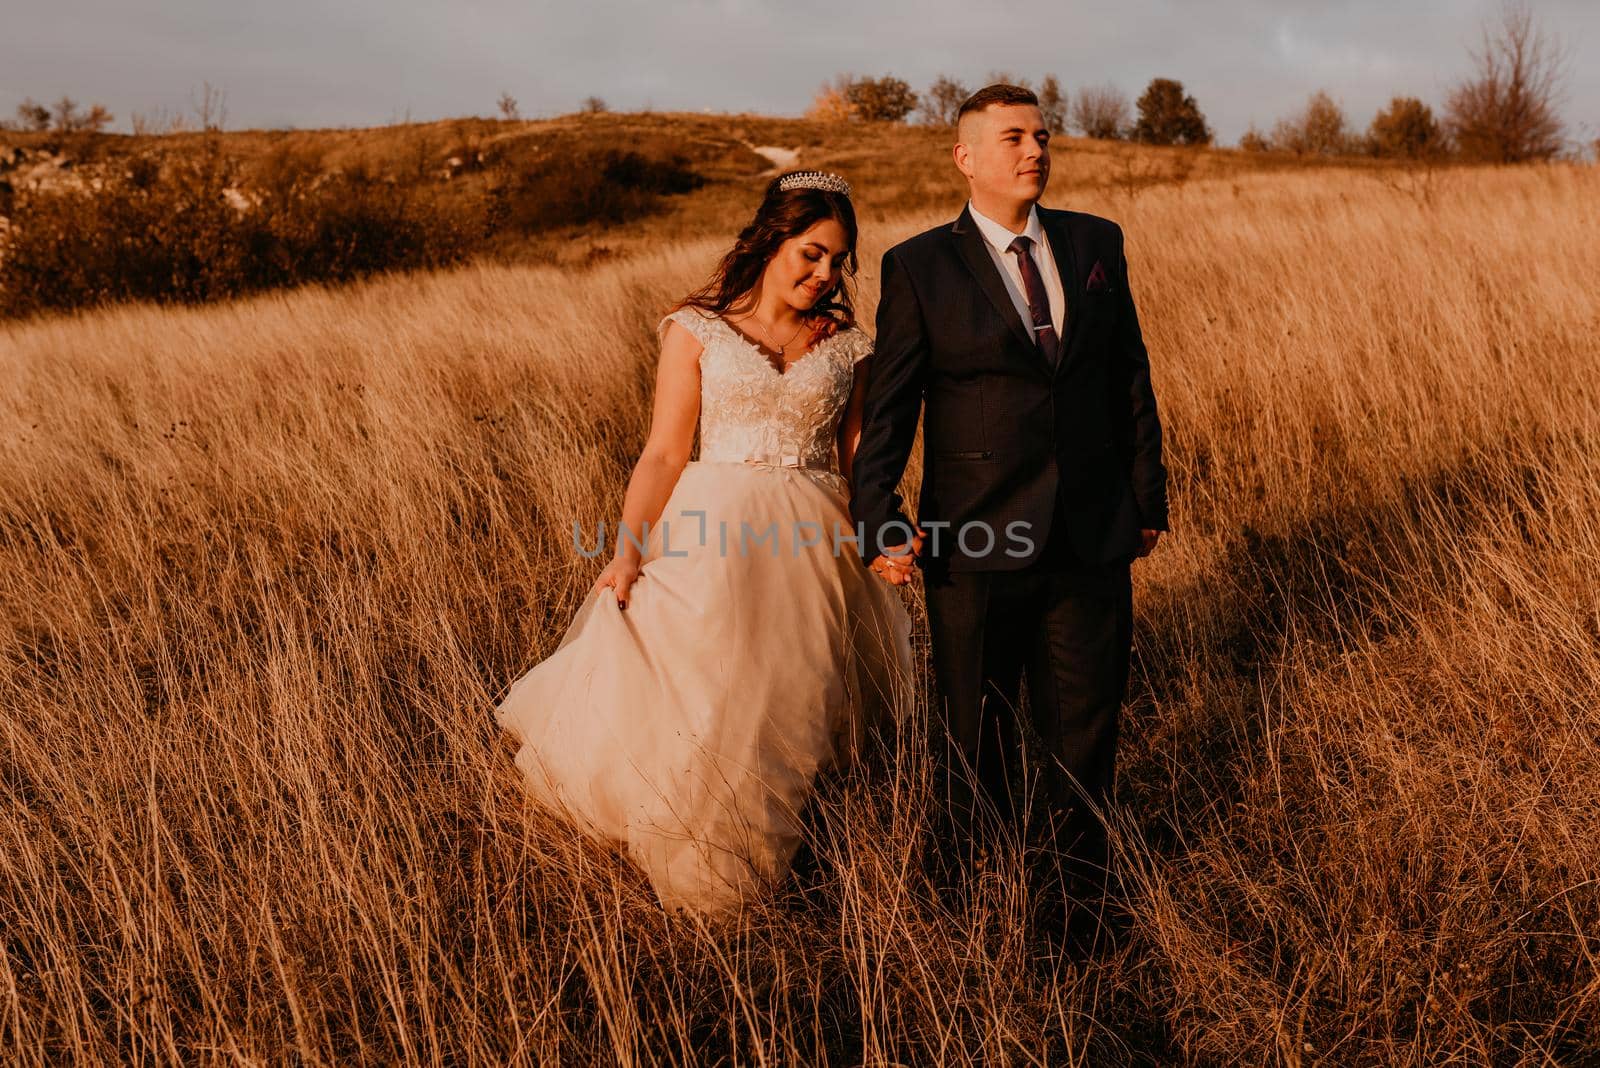 couple in love wedding newlyweds in a white dress and suit are walking on long grass in a field in summer. man and woman holding hands